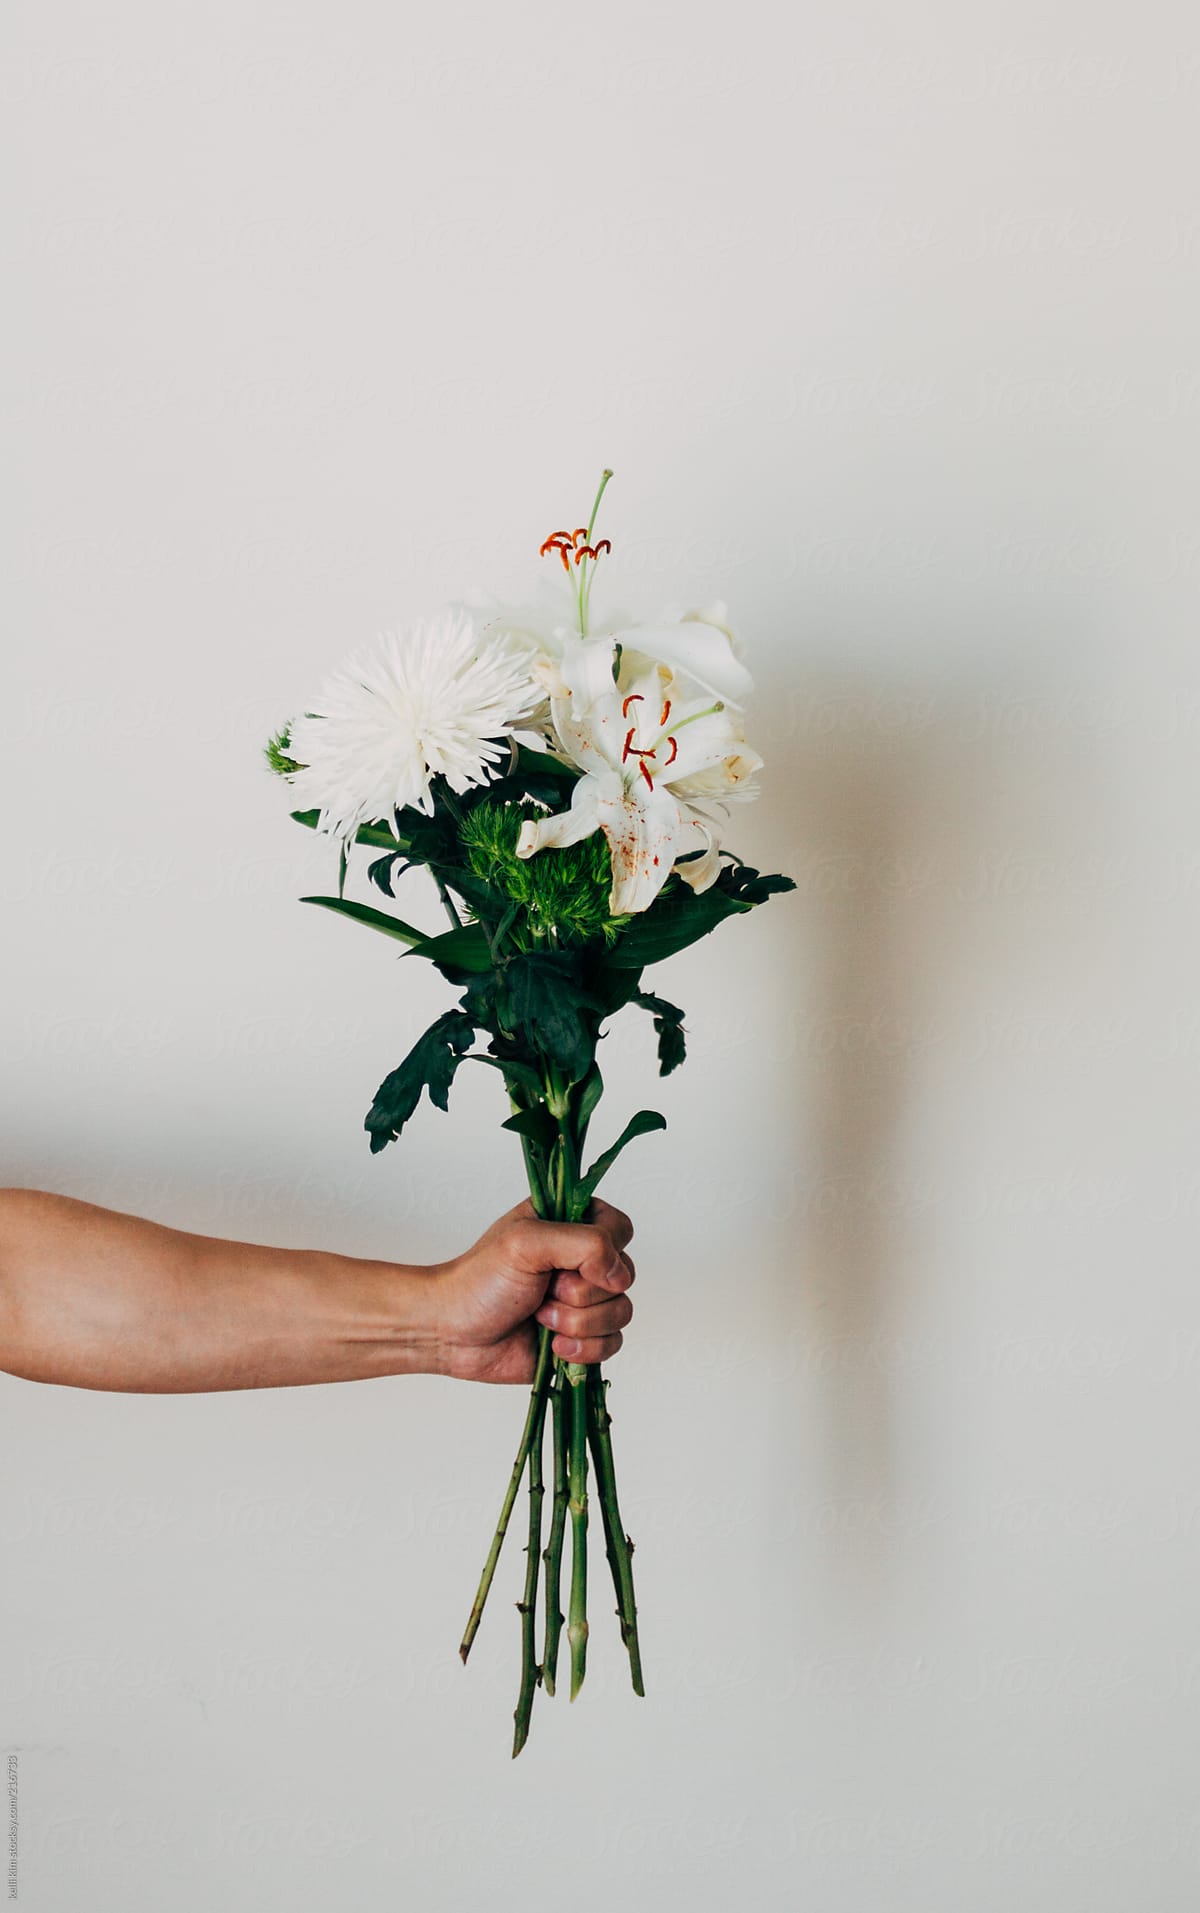 Hand holds bouquet of white flowers